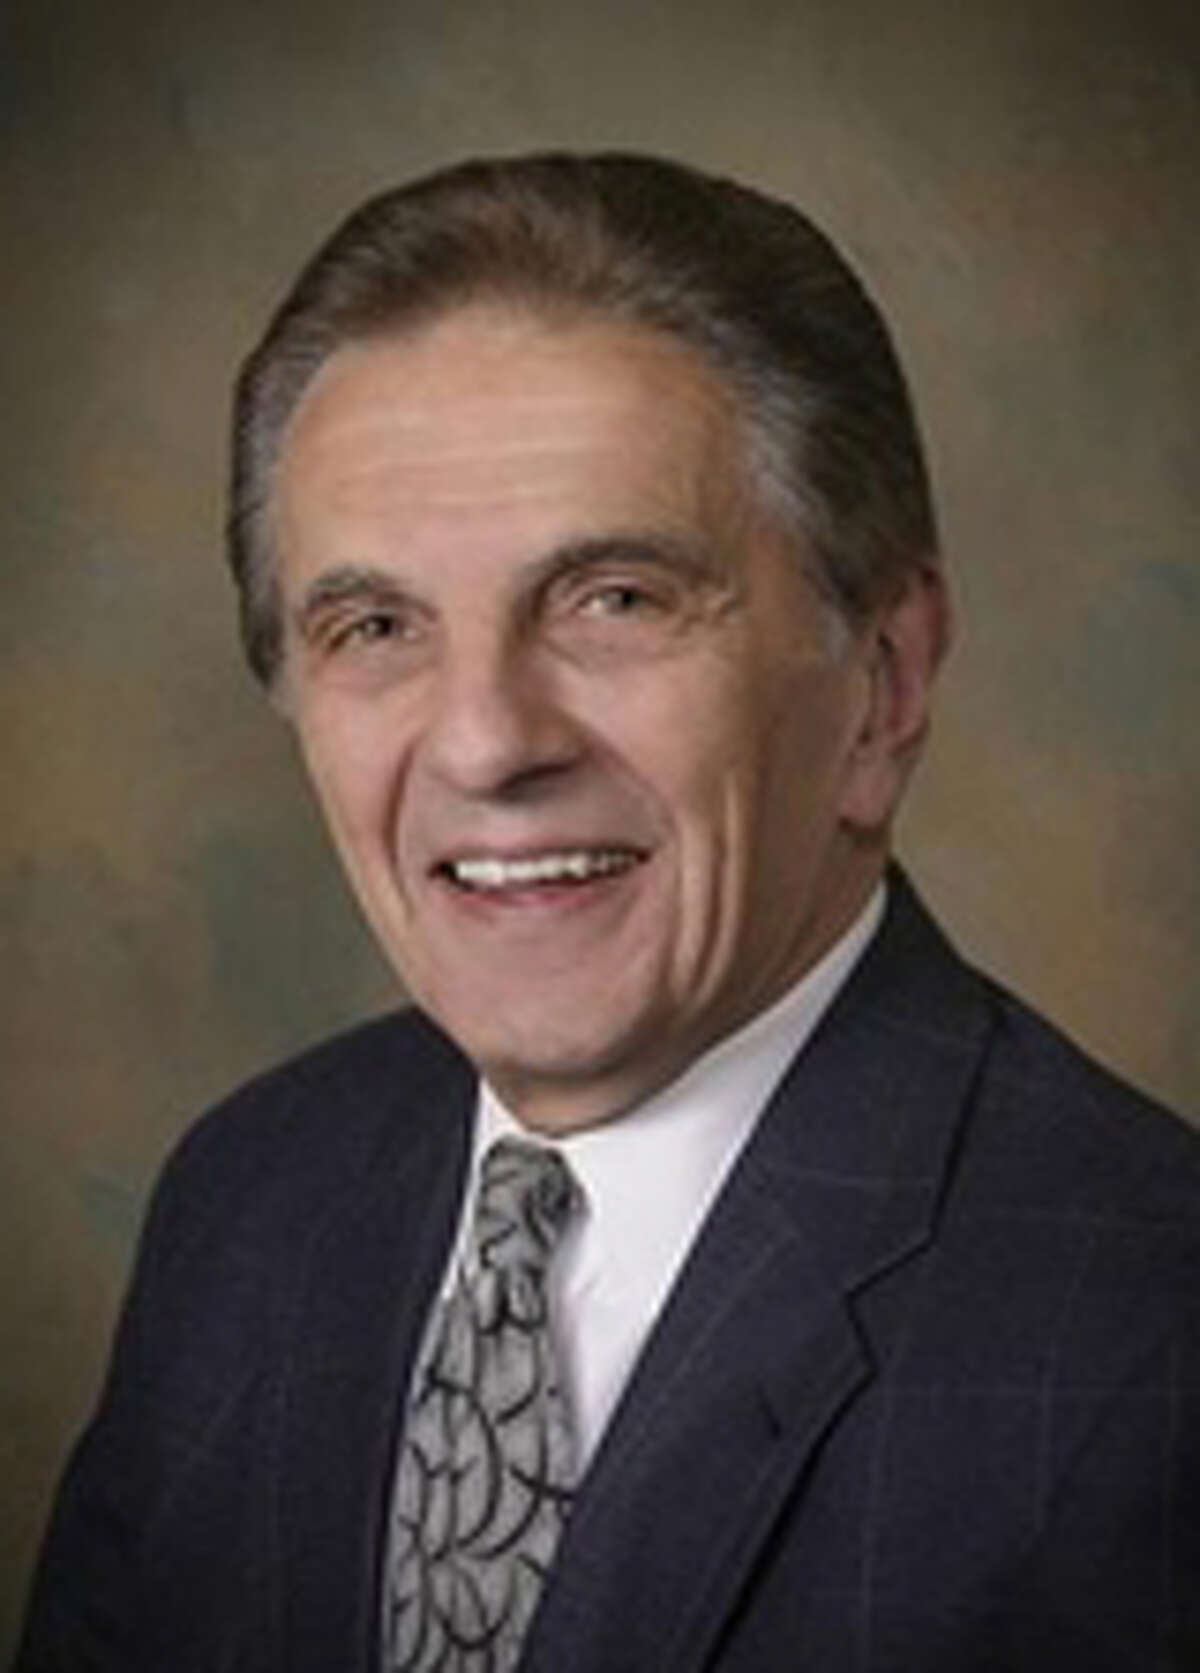 Attorney Frank Riccio Sr. died Sunday, March 3rd, 2013 at the age of 70.